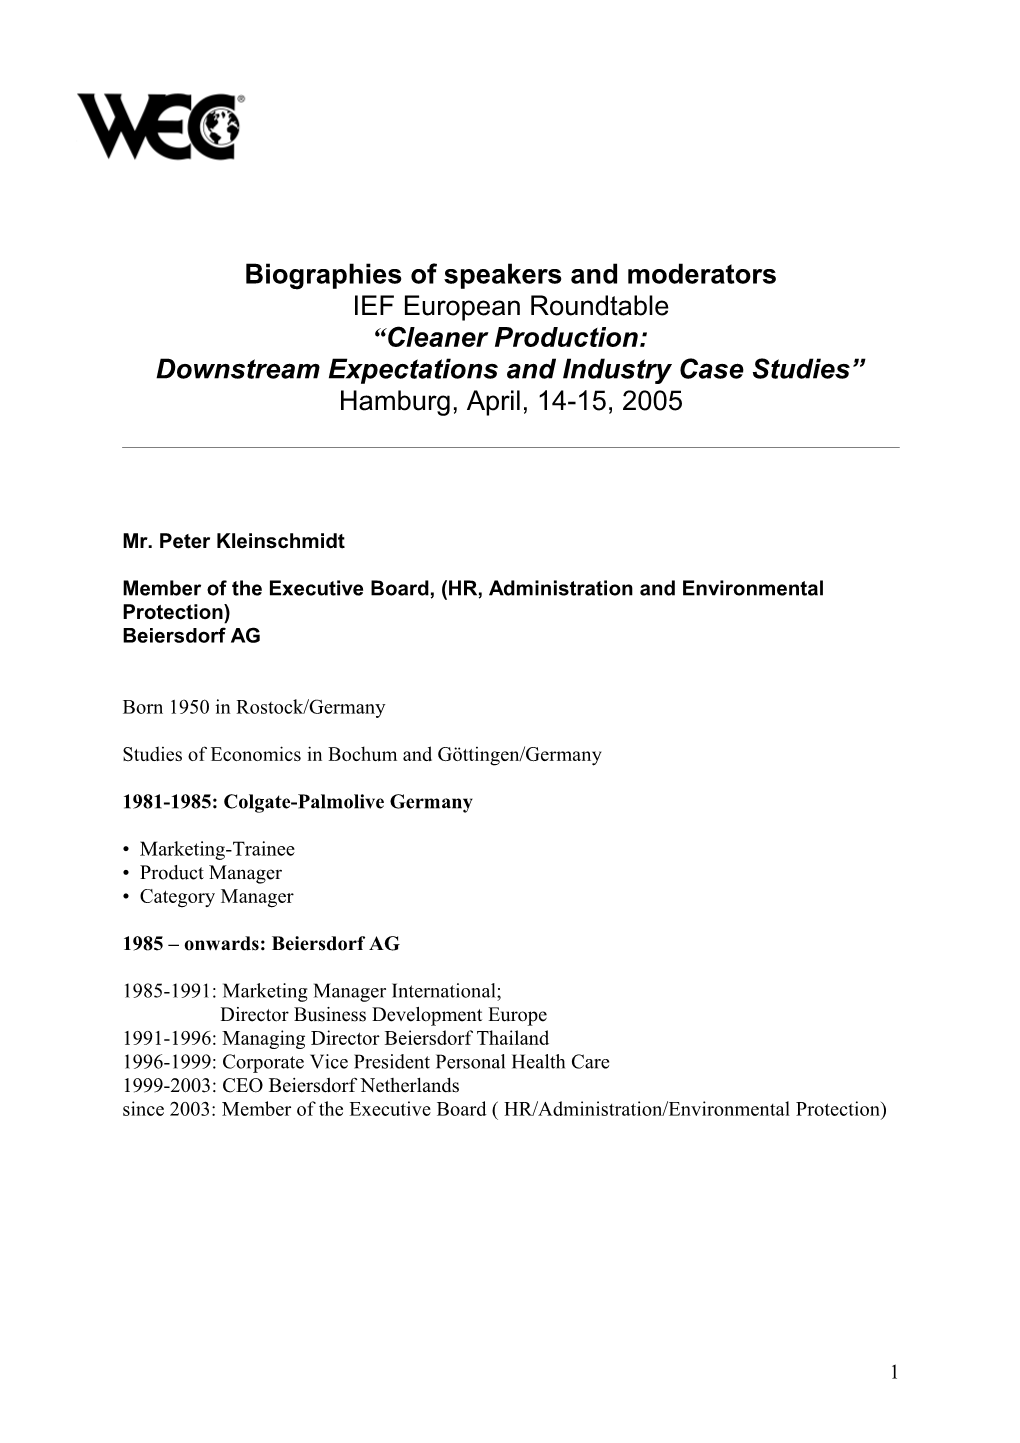 Biographies of Speakers and Moderators to the IEF European Roundtable, Cleaner Production